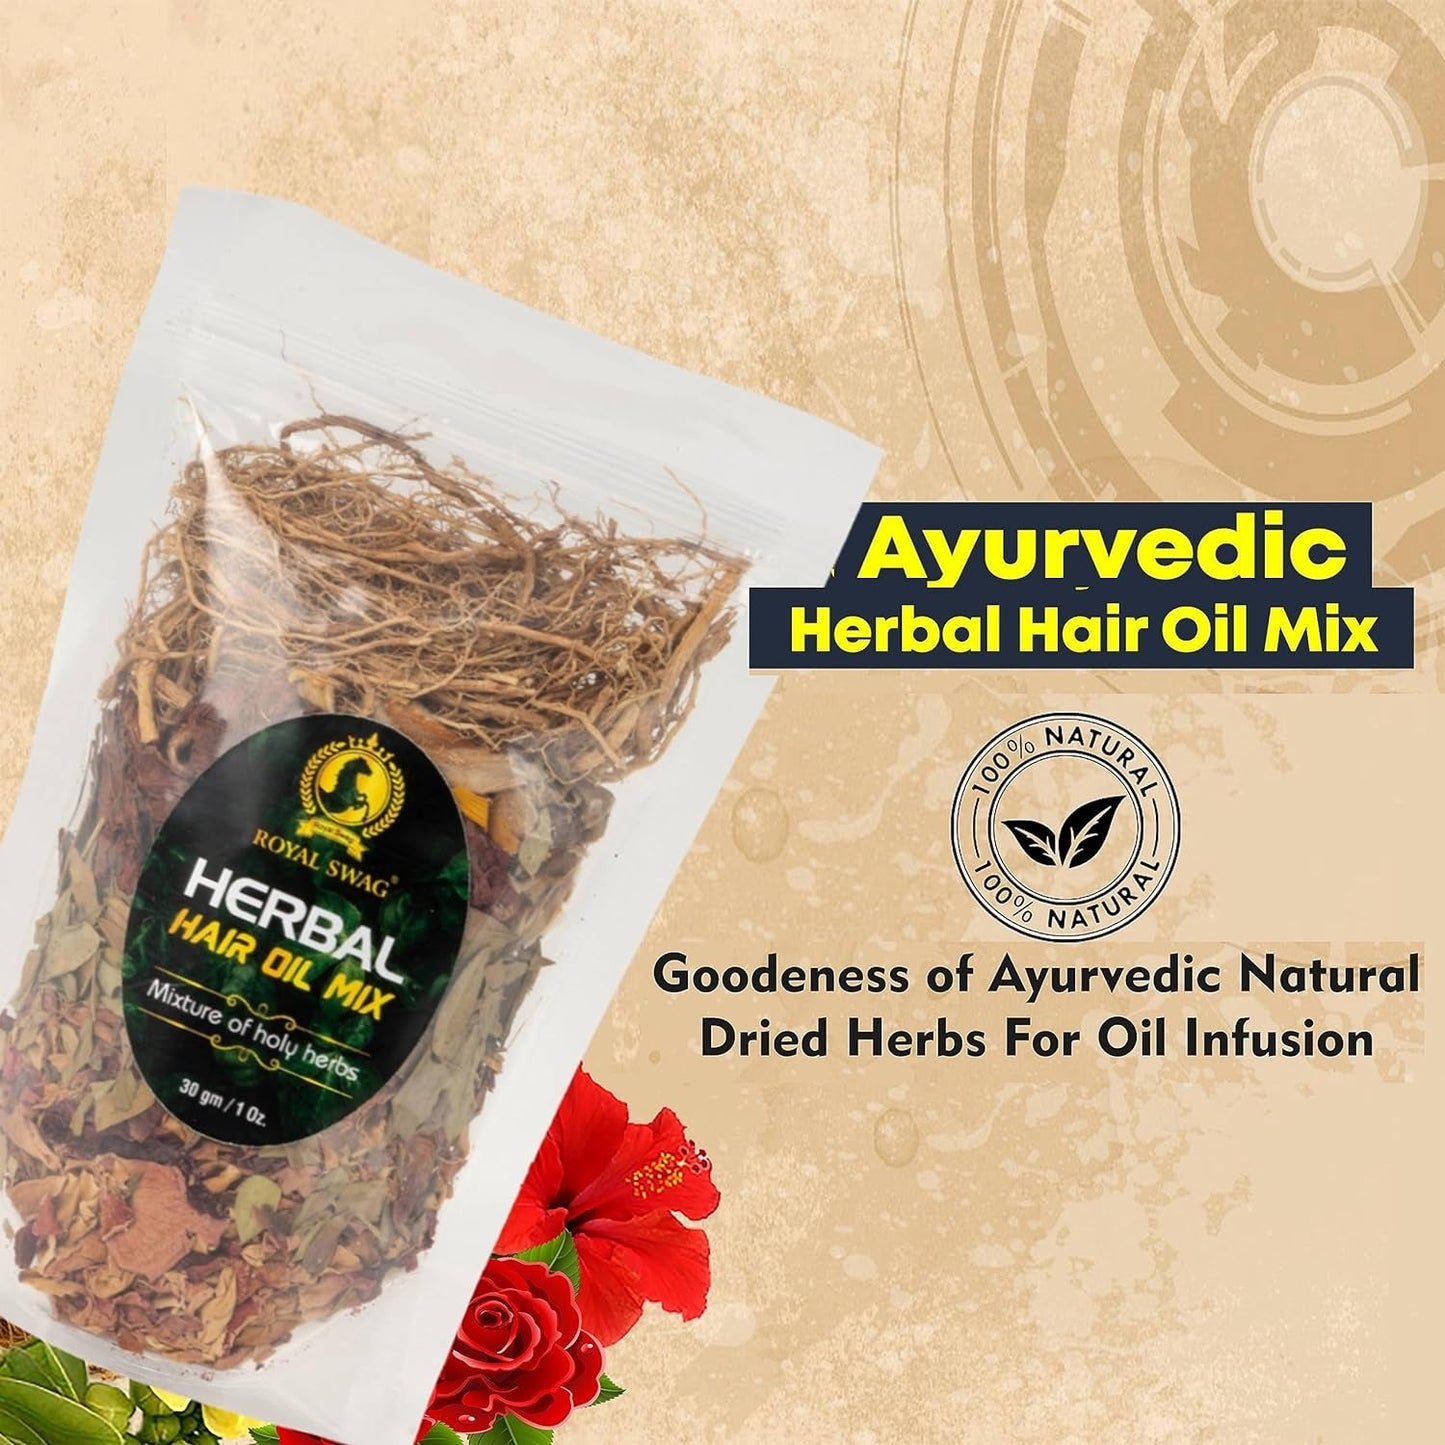 Herbal Hair Oil Mix 30 G X 2 Packs for Healthy Hair Packed with Goodeness of Ayurvedic Natural Dried Herbs for Oil Infusion | Made in India | Pack of 2(1 Pack = 1 Oz/30 Gm)